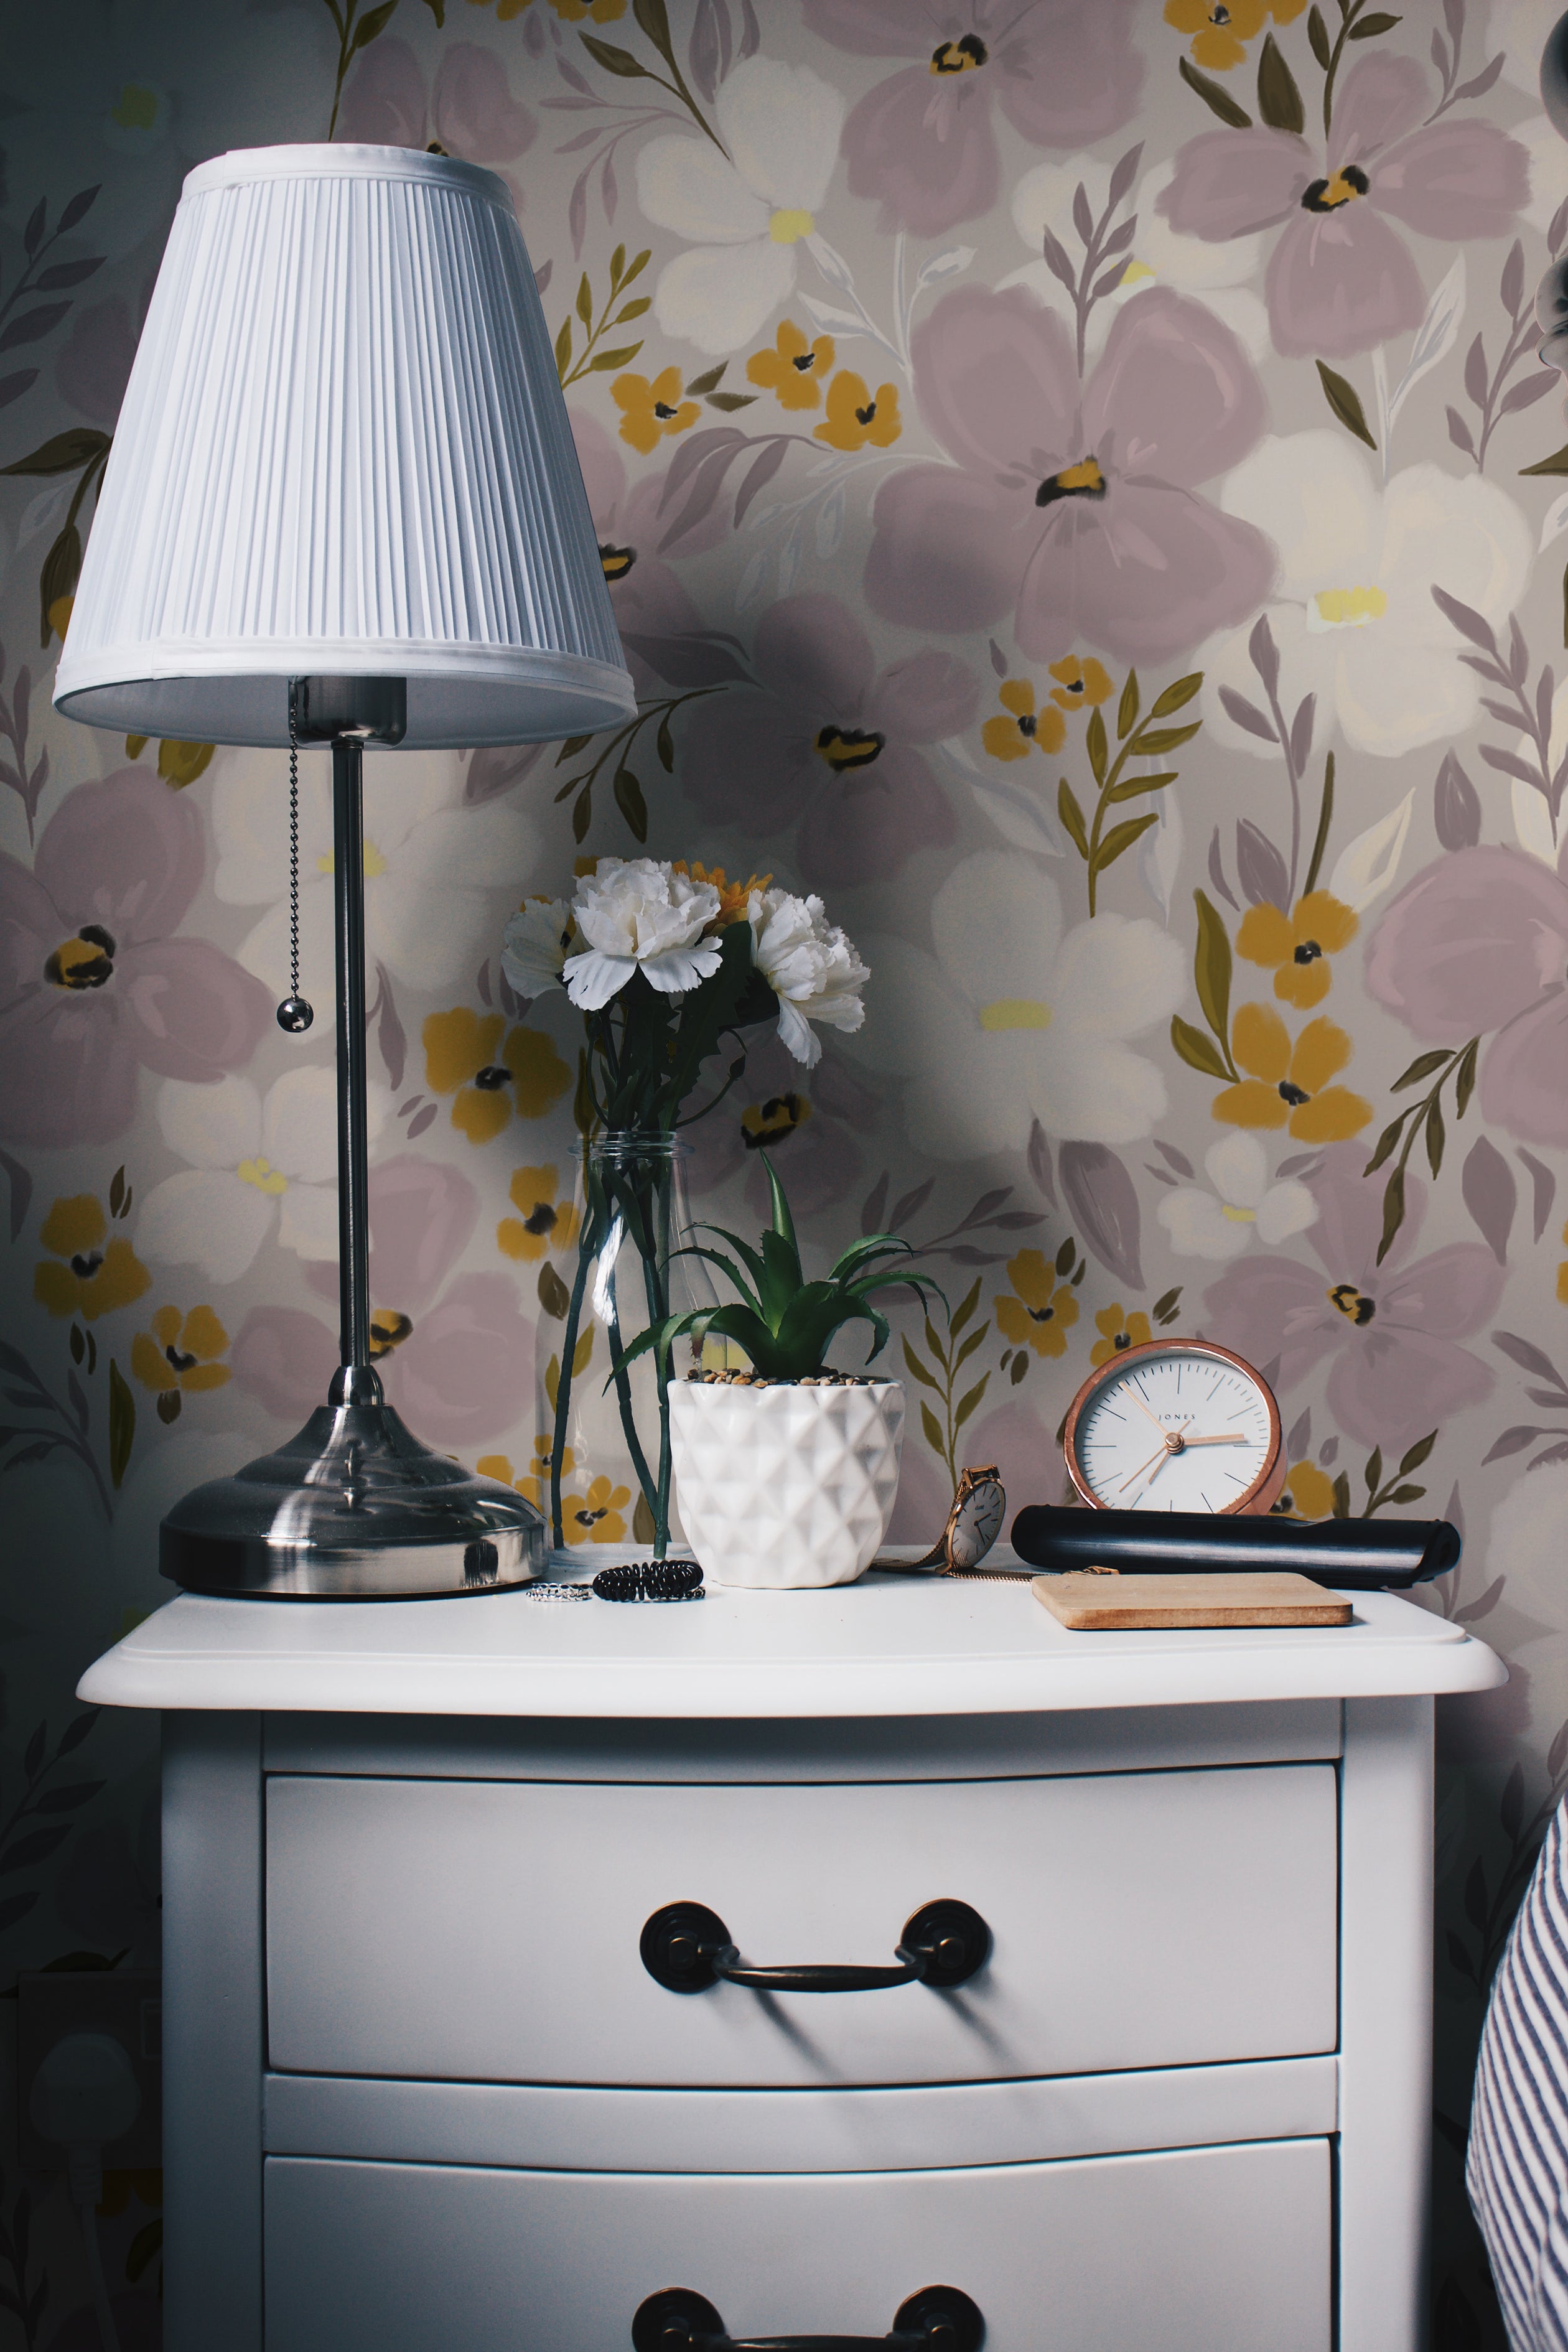 An elegantly decorated space showcasing the Fleur Wallpaper. The wallpaper provides a charming backdrop to a white nightstand, topped with a silver lamp, a glass vase with white flowers, a succulent plant in a ceramic pot, and a vintage clock. The floral pattern adds a fresh and airy feel to the room, enhancing the light and cozy decor.